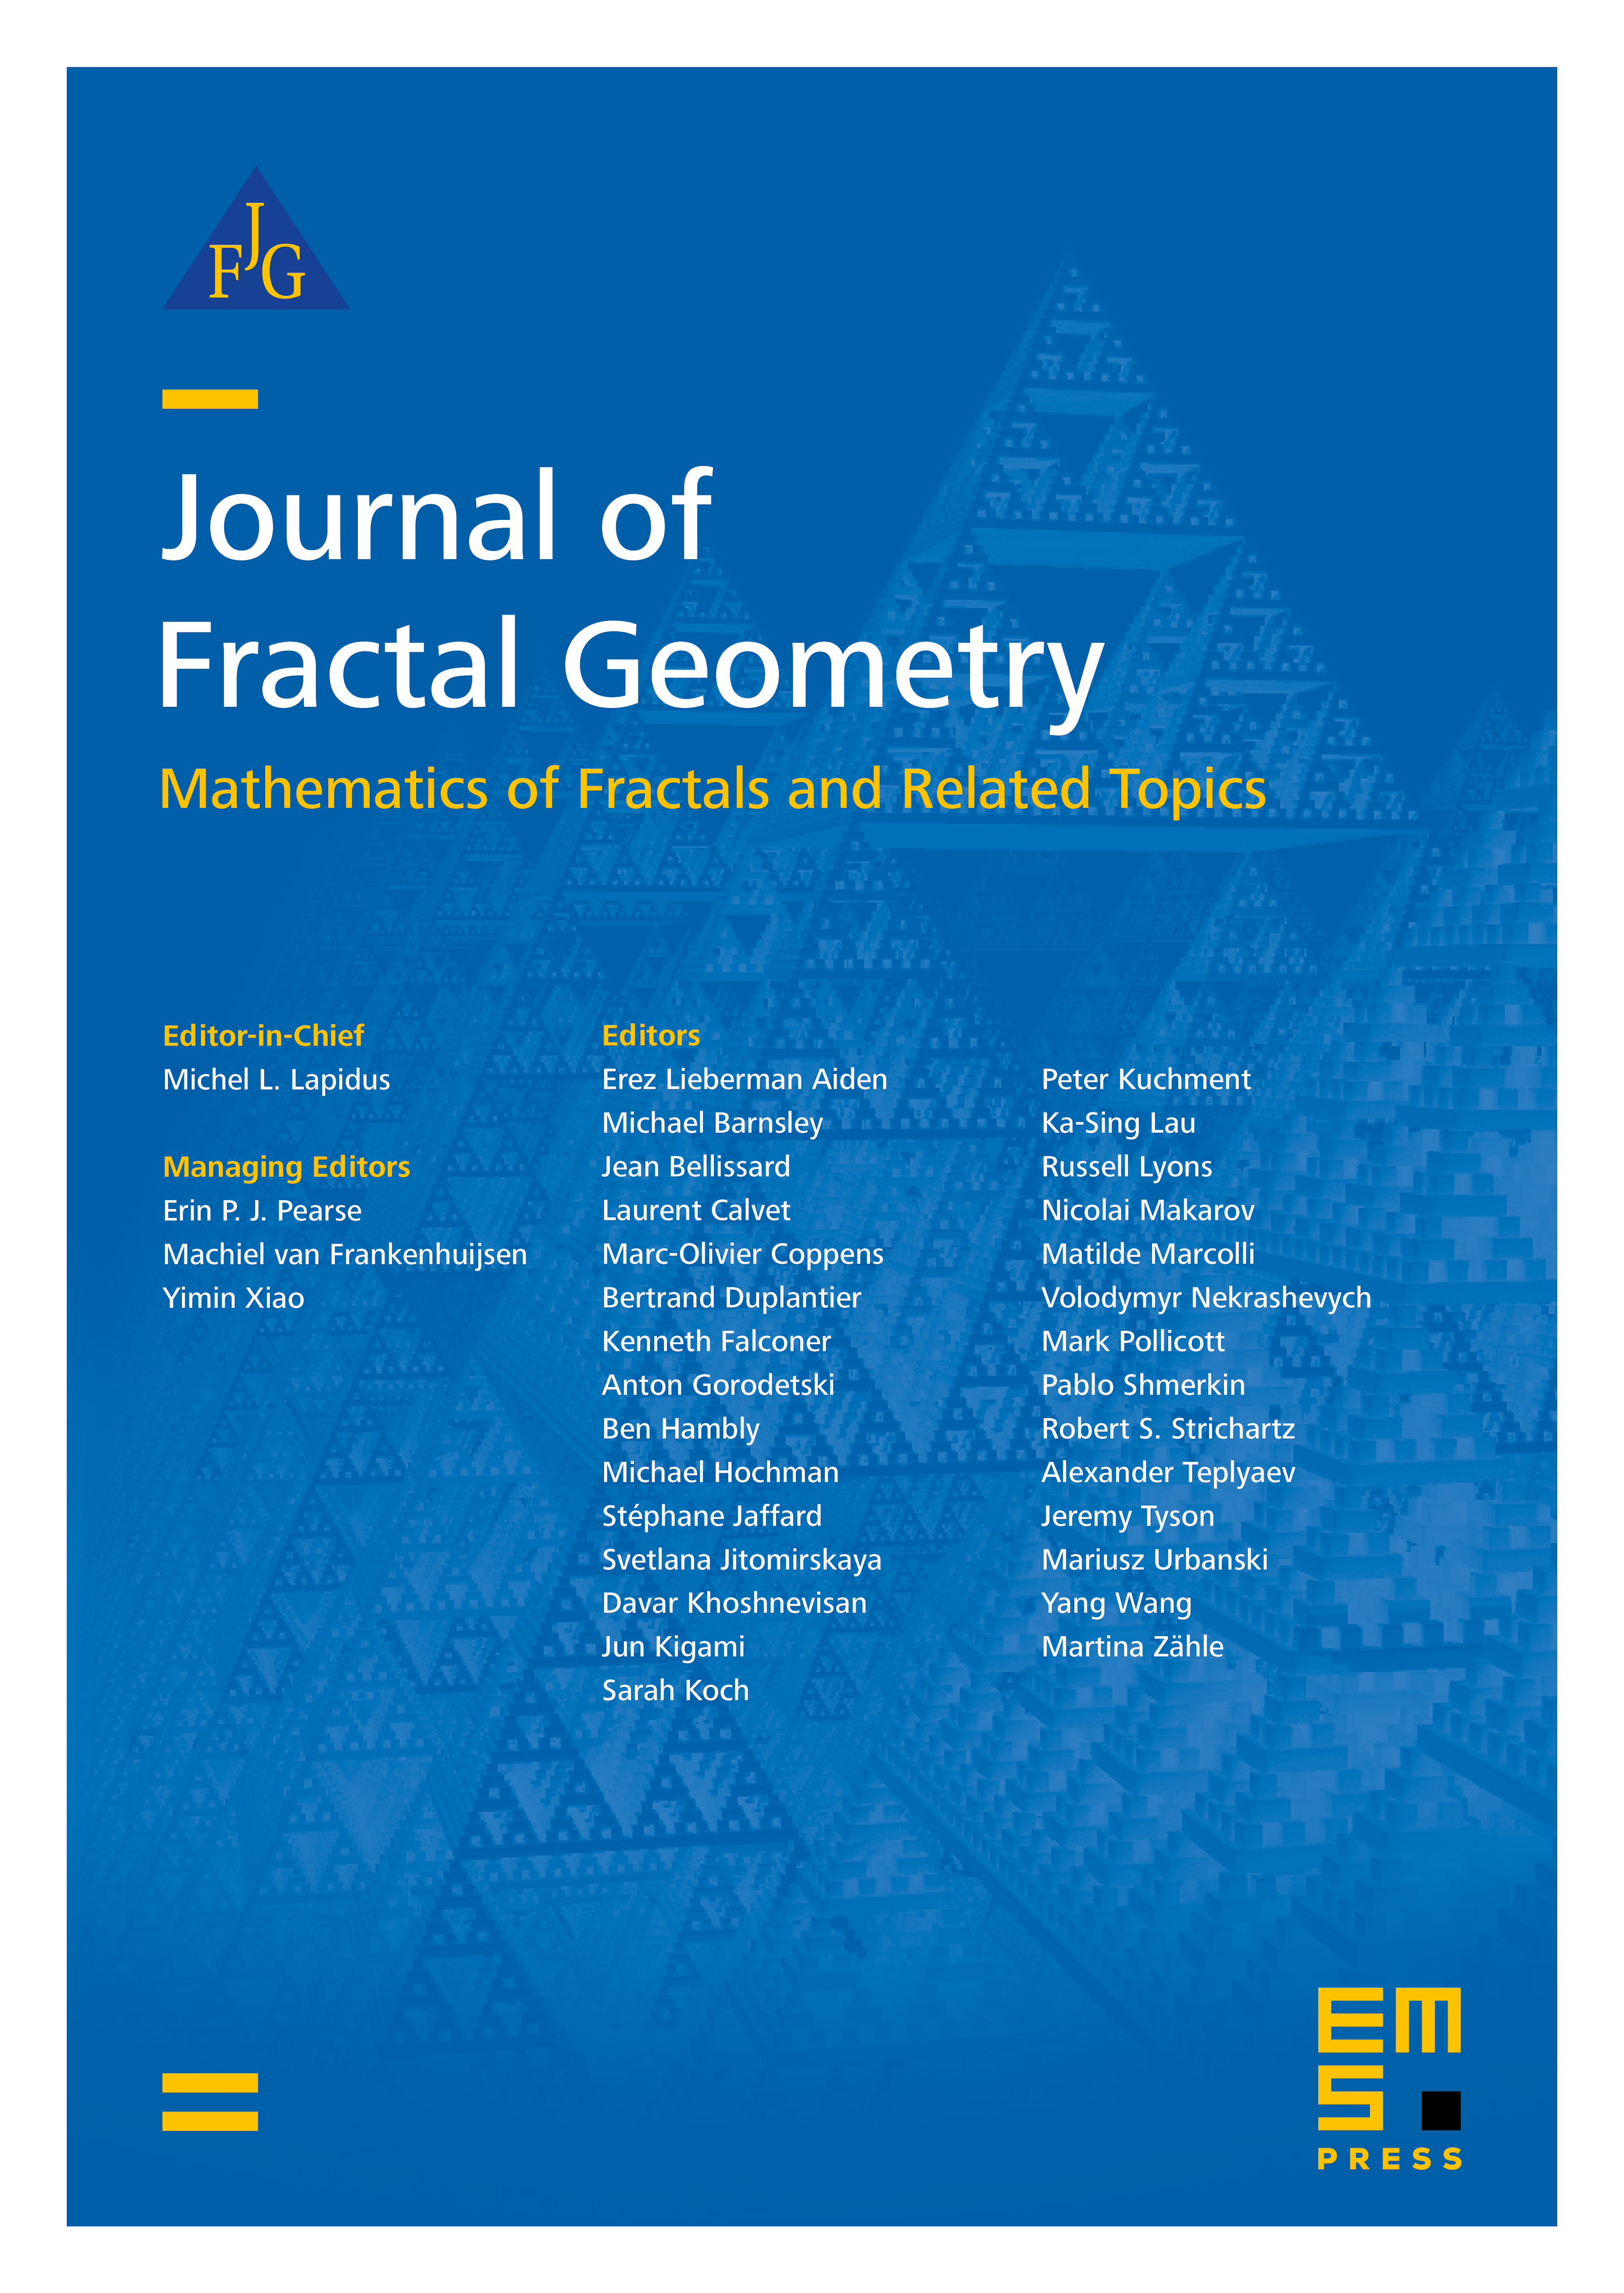 Multifractal analysis of Birkhoff averages for typical infinitely generated self-affine sets cover